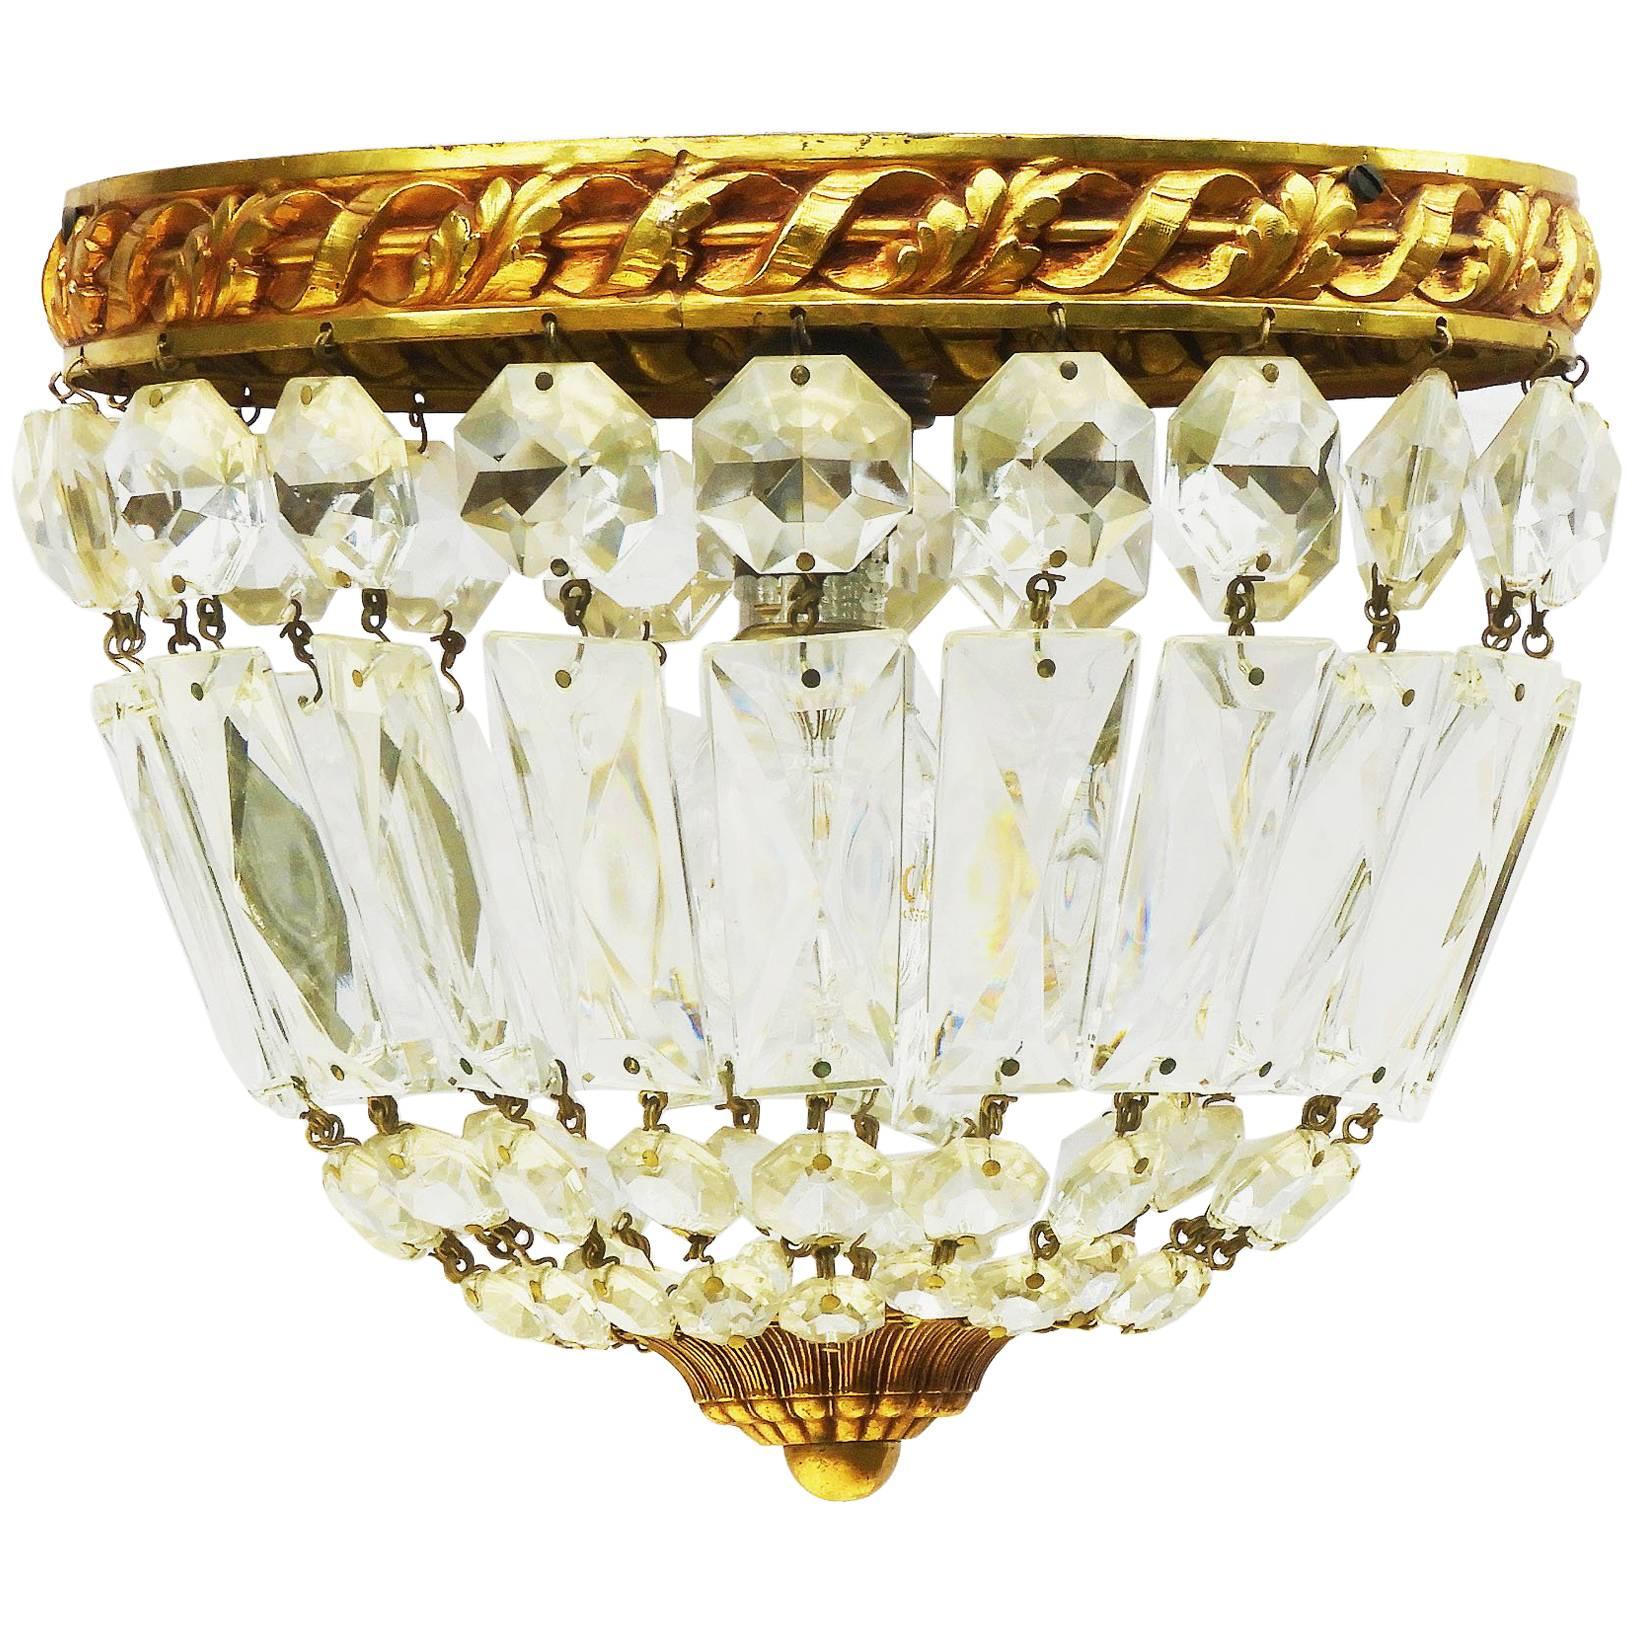 French Crystal Flush Mount Ceiling Light or Pendant, Early 20th Century Louis 